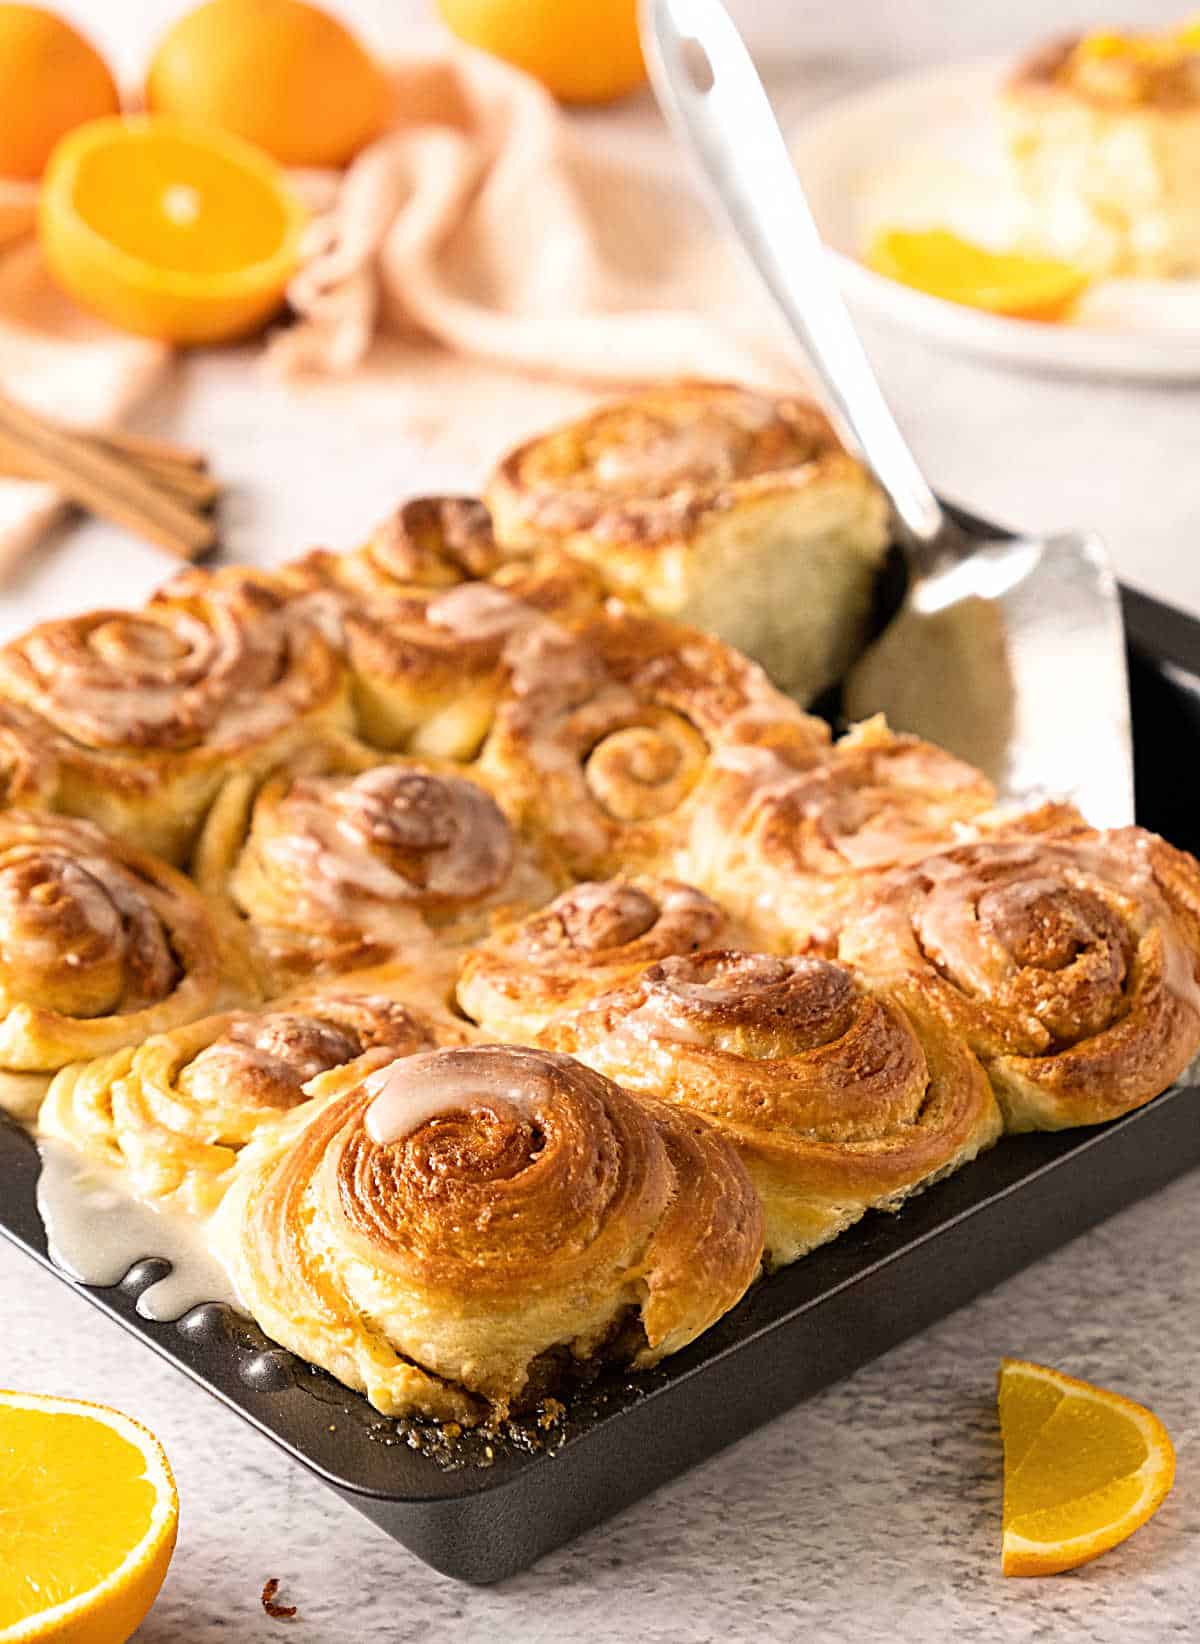 Tray of orange cinnamon rolls on a gray surface. Orange pieces in the background.